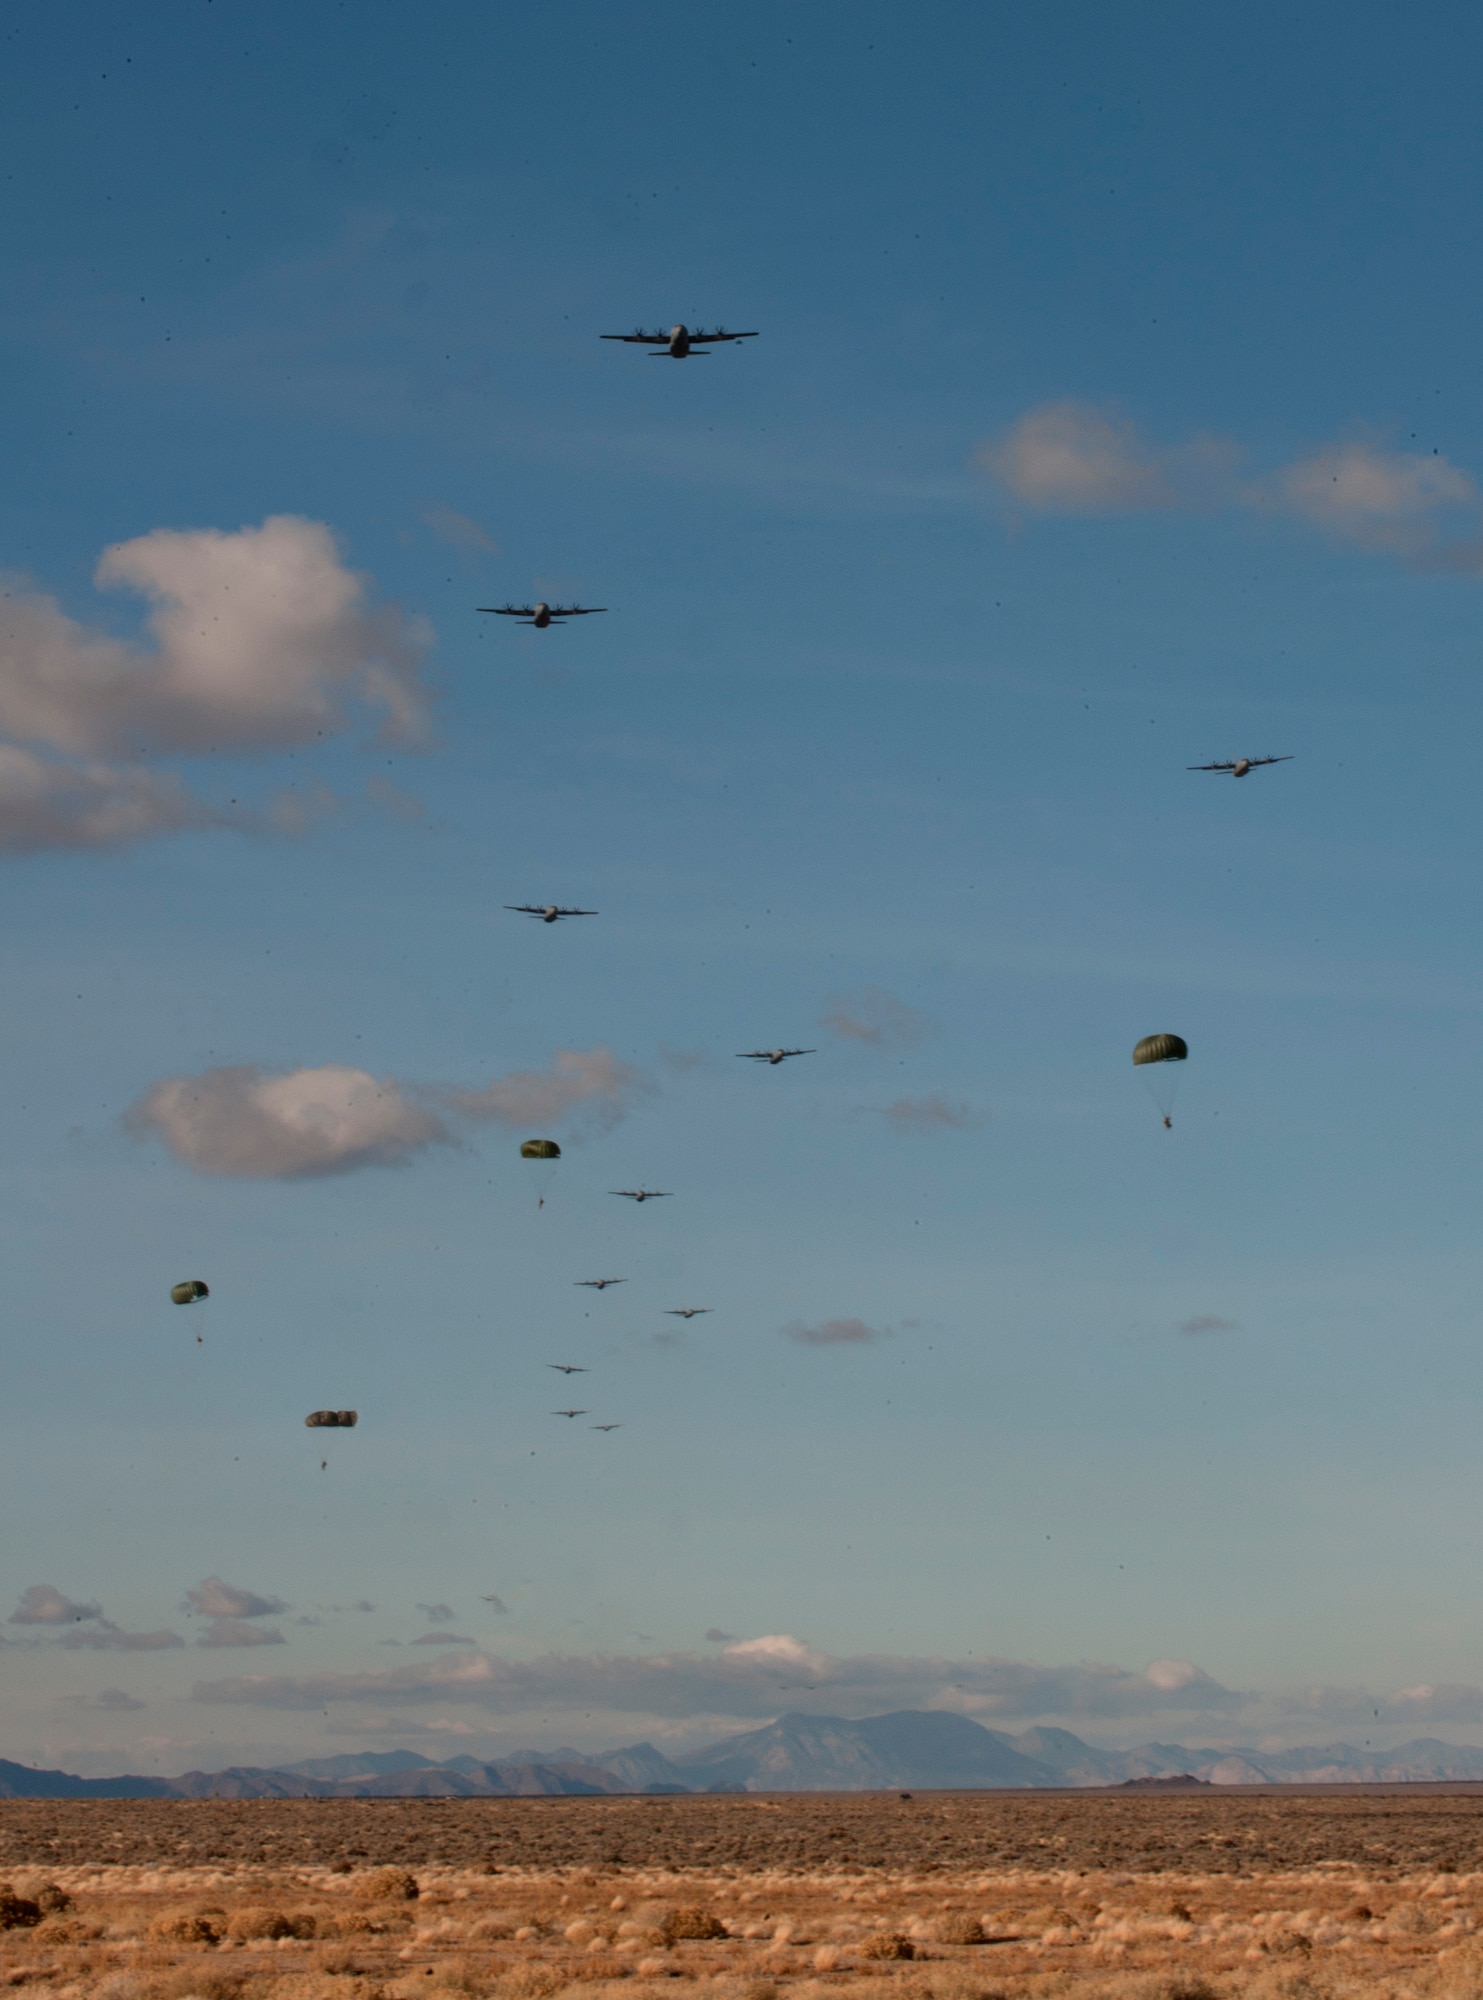 Paratroopers assigned to the 3rd Brigade Combat Team, 82nd Airborne Division, Fort Bragg, N.C., jump from C-17 Globemaster IIIs and C-130 Hercules during the U.S. Air Force Weapons School's Joint Forcible Entry Exercise 14B on the Nevada Test and Training Range, Dec. 6, 2014. JFEX, a USAF Weapons School large-scale air mobility exercise, challenges students to plan and execute a complex air-land operation in a simulated contested battlefield. (U.S. Air Force photo by Staff Sgt. Victoria Sneed)